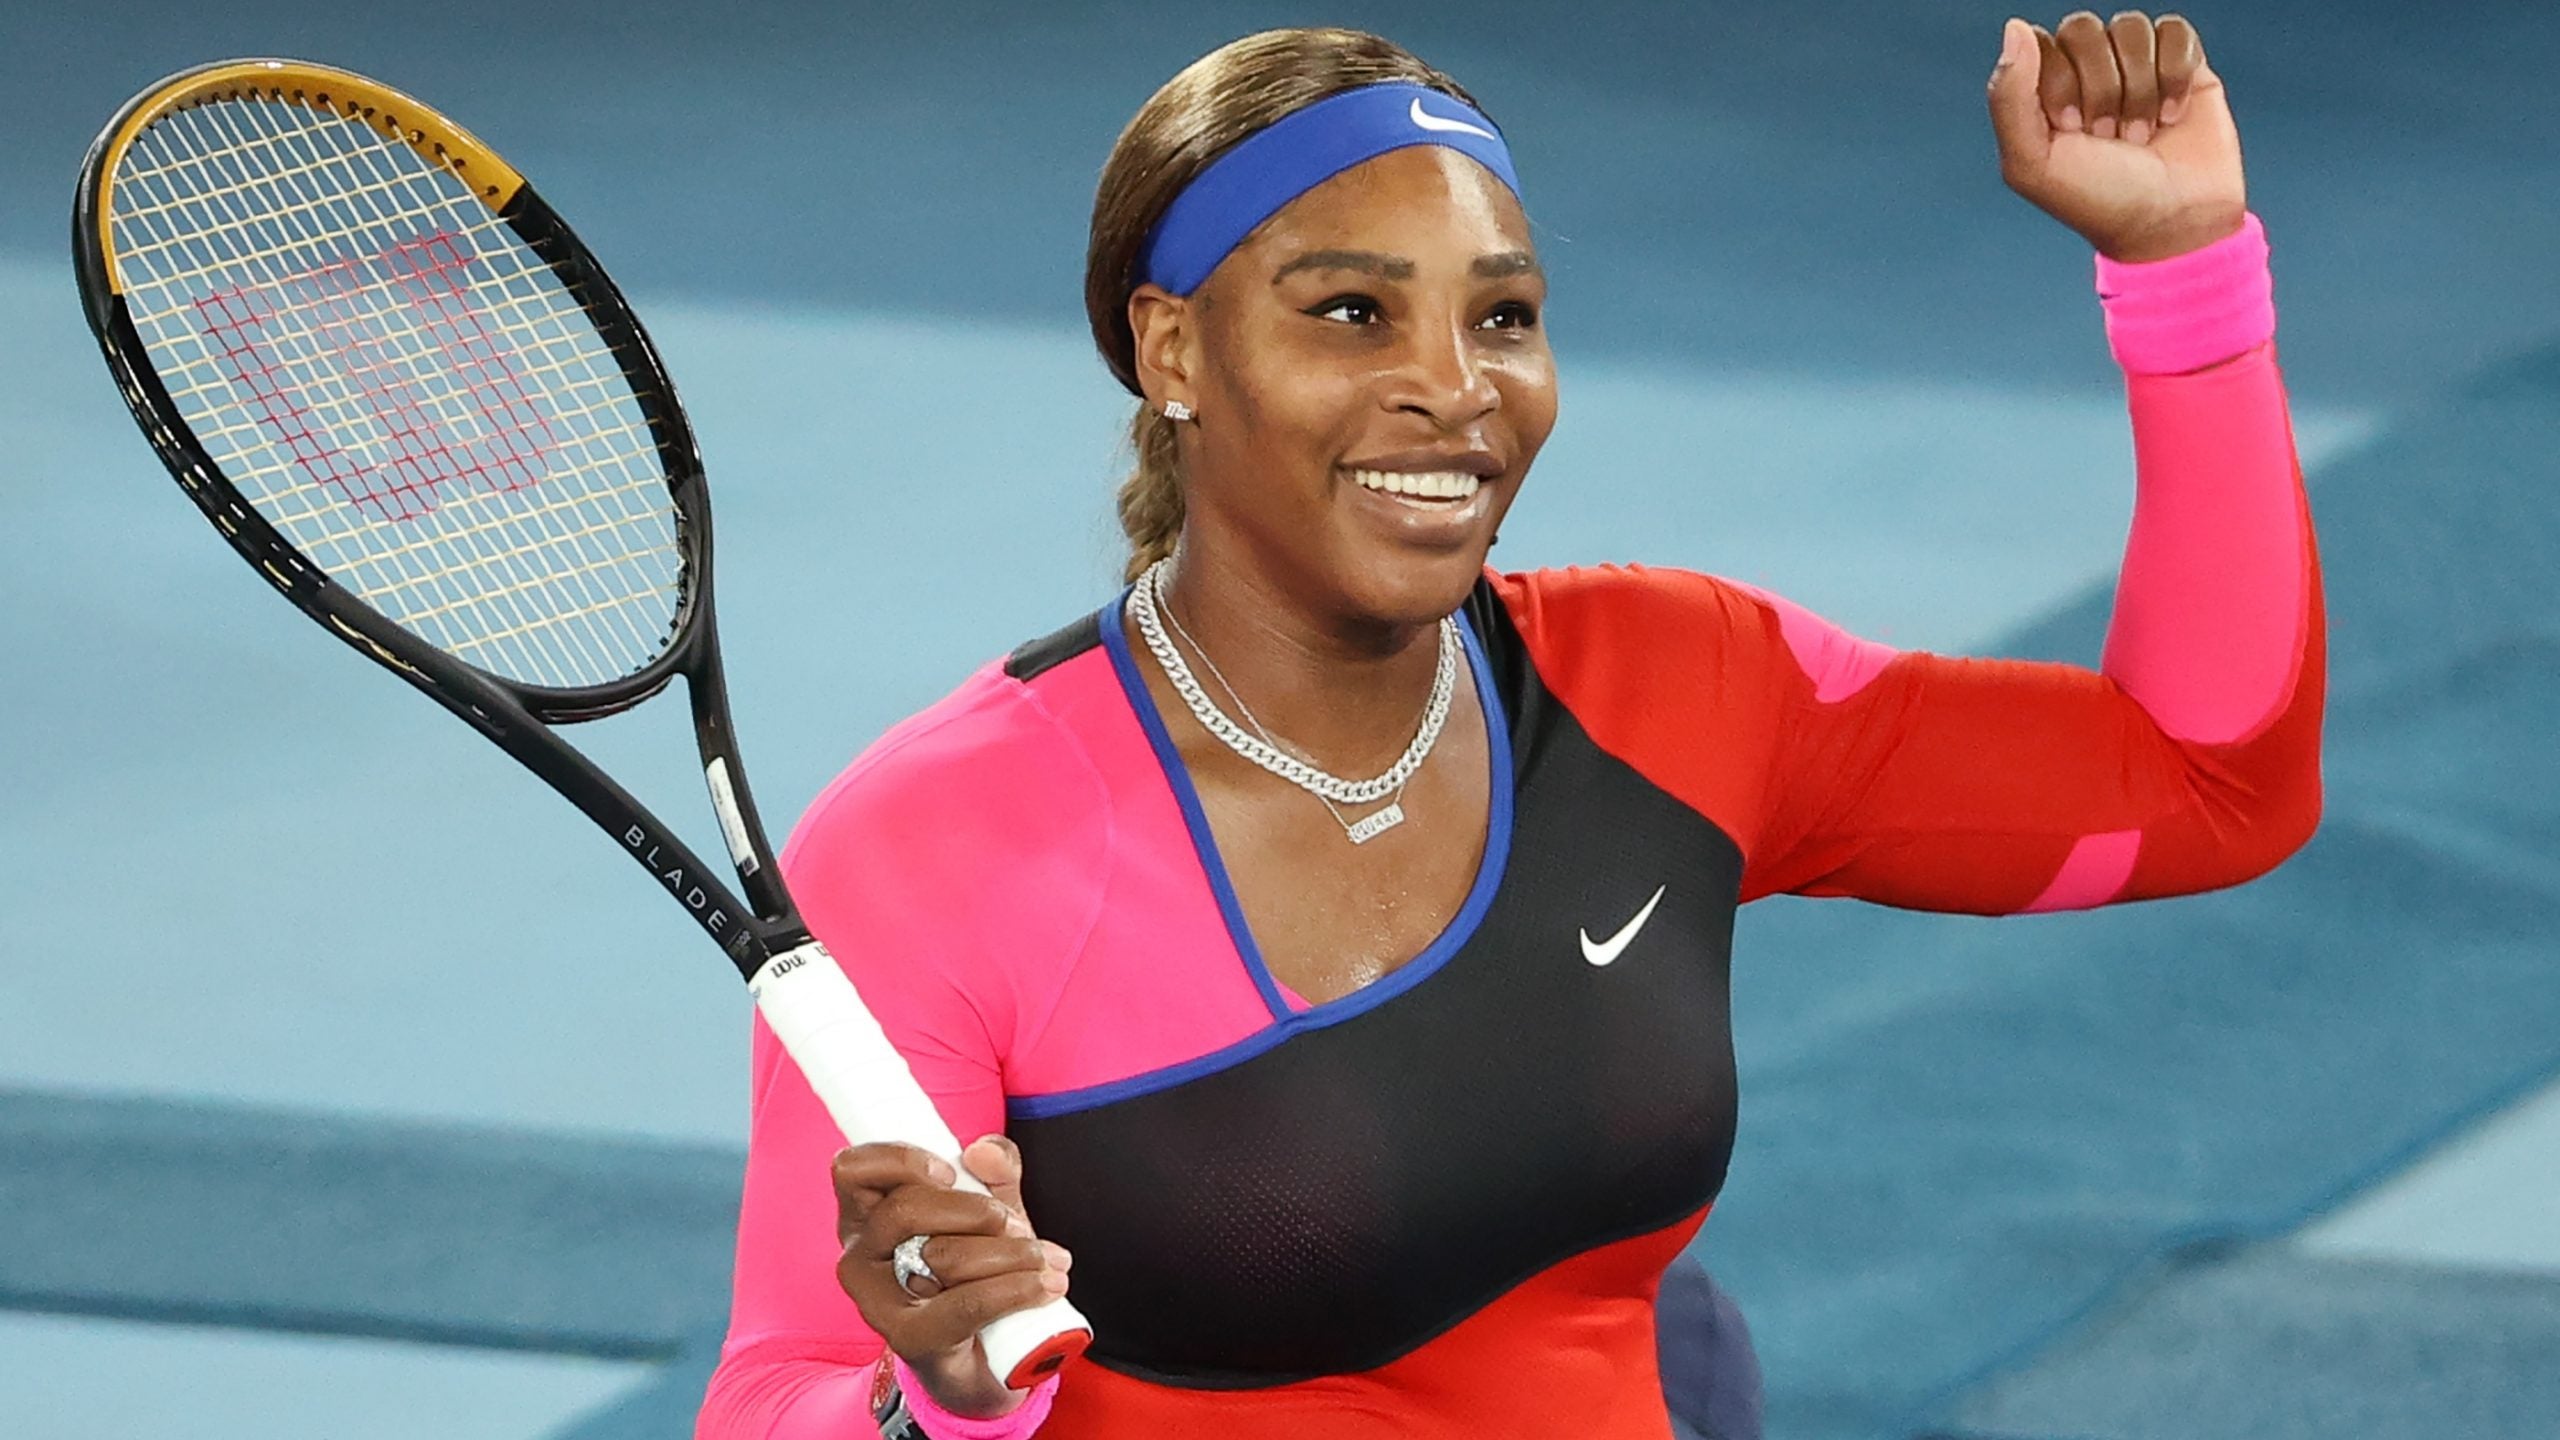 Serena Williams Withdraws From U.S. Open Due To Injury